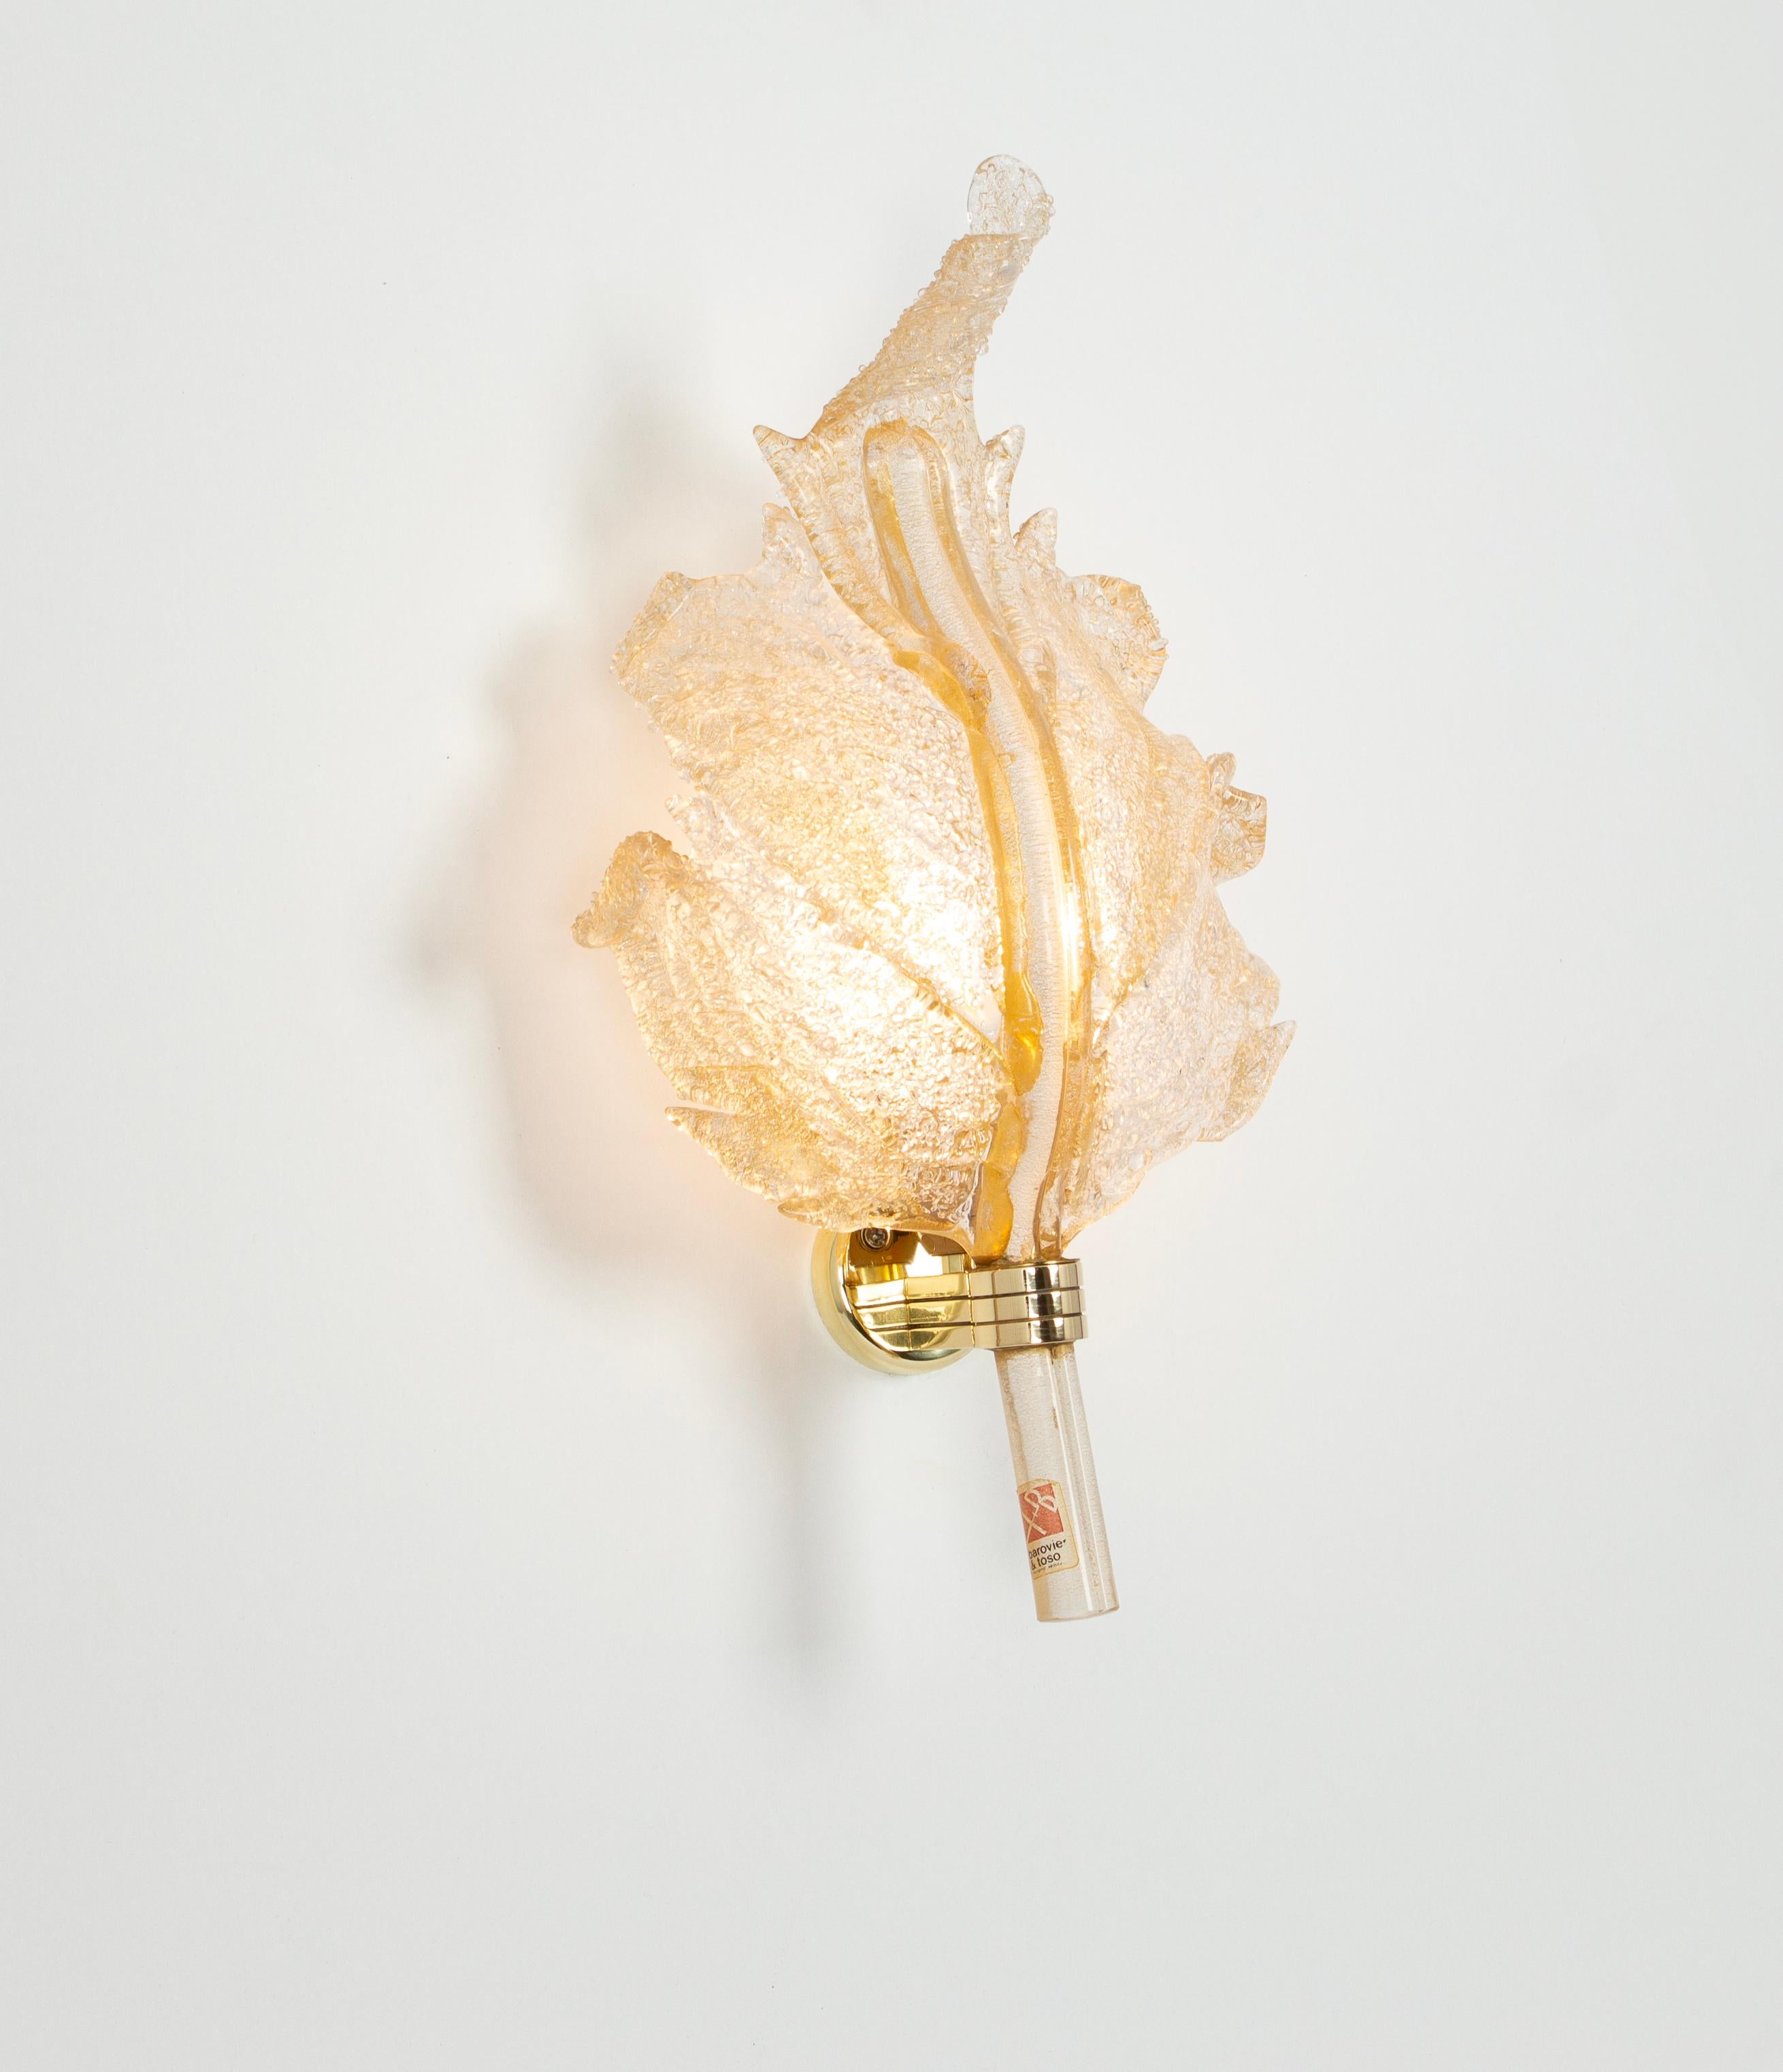 Pair of Large Murano Glass Wall Sconce by Barovier & Toso, Italy, 1970s For Sale 2